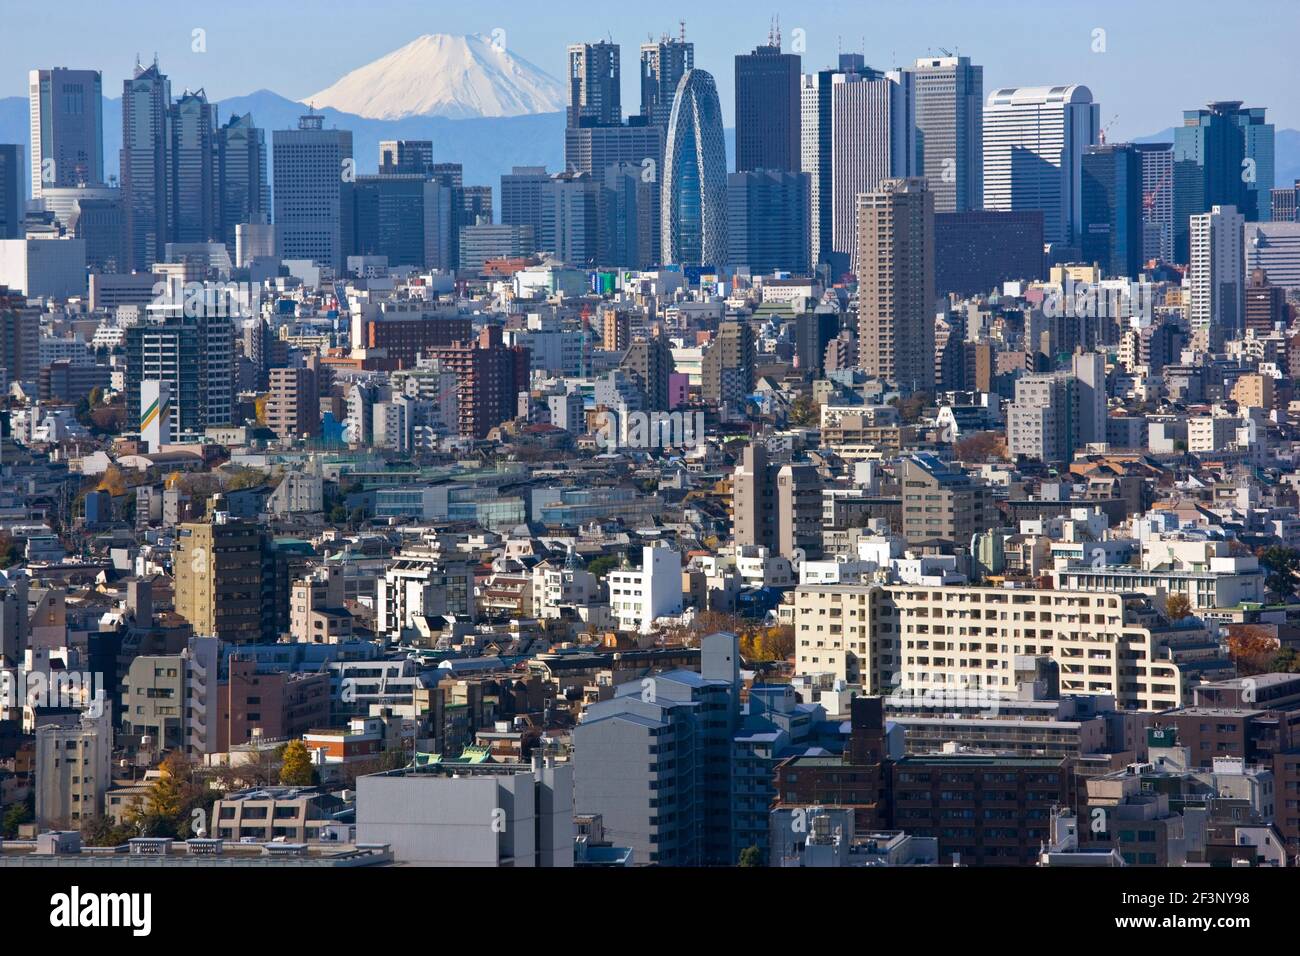 A telephoto view on a clear winter day captures a snow-capped Mt. Fuji rising dramatically beyond the skyscrapers (including Tokyo City Hall) of the S Stock Photo